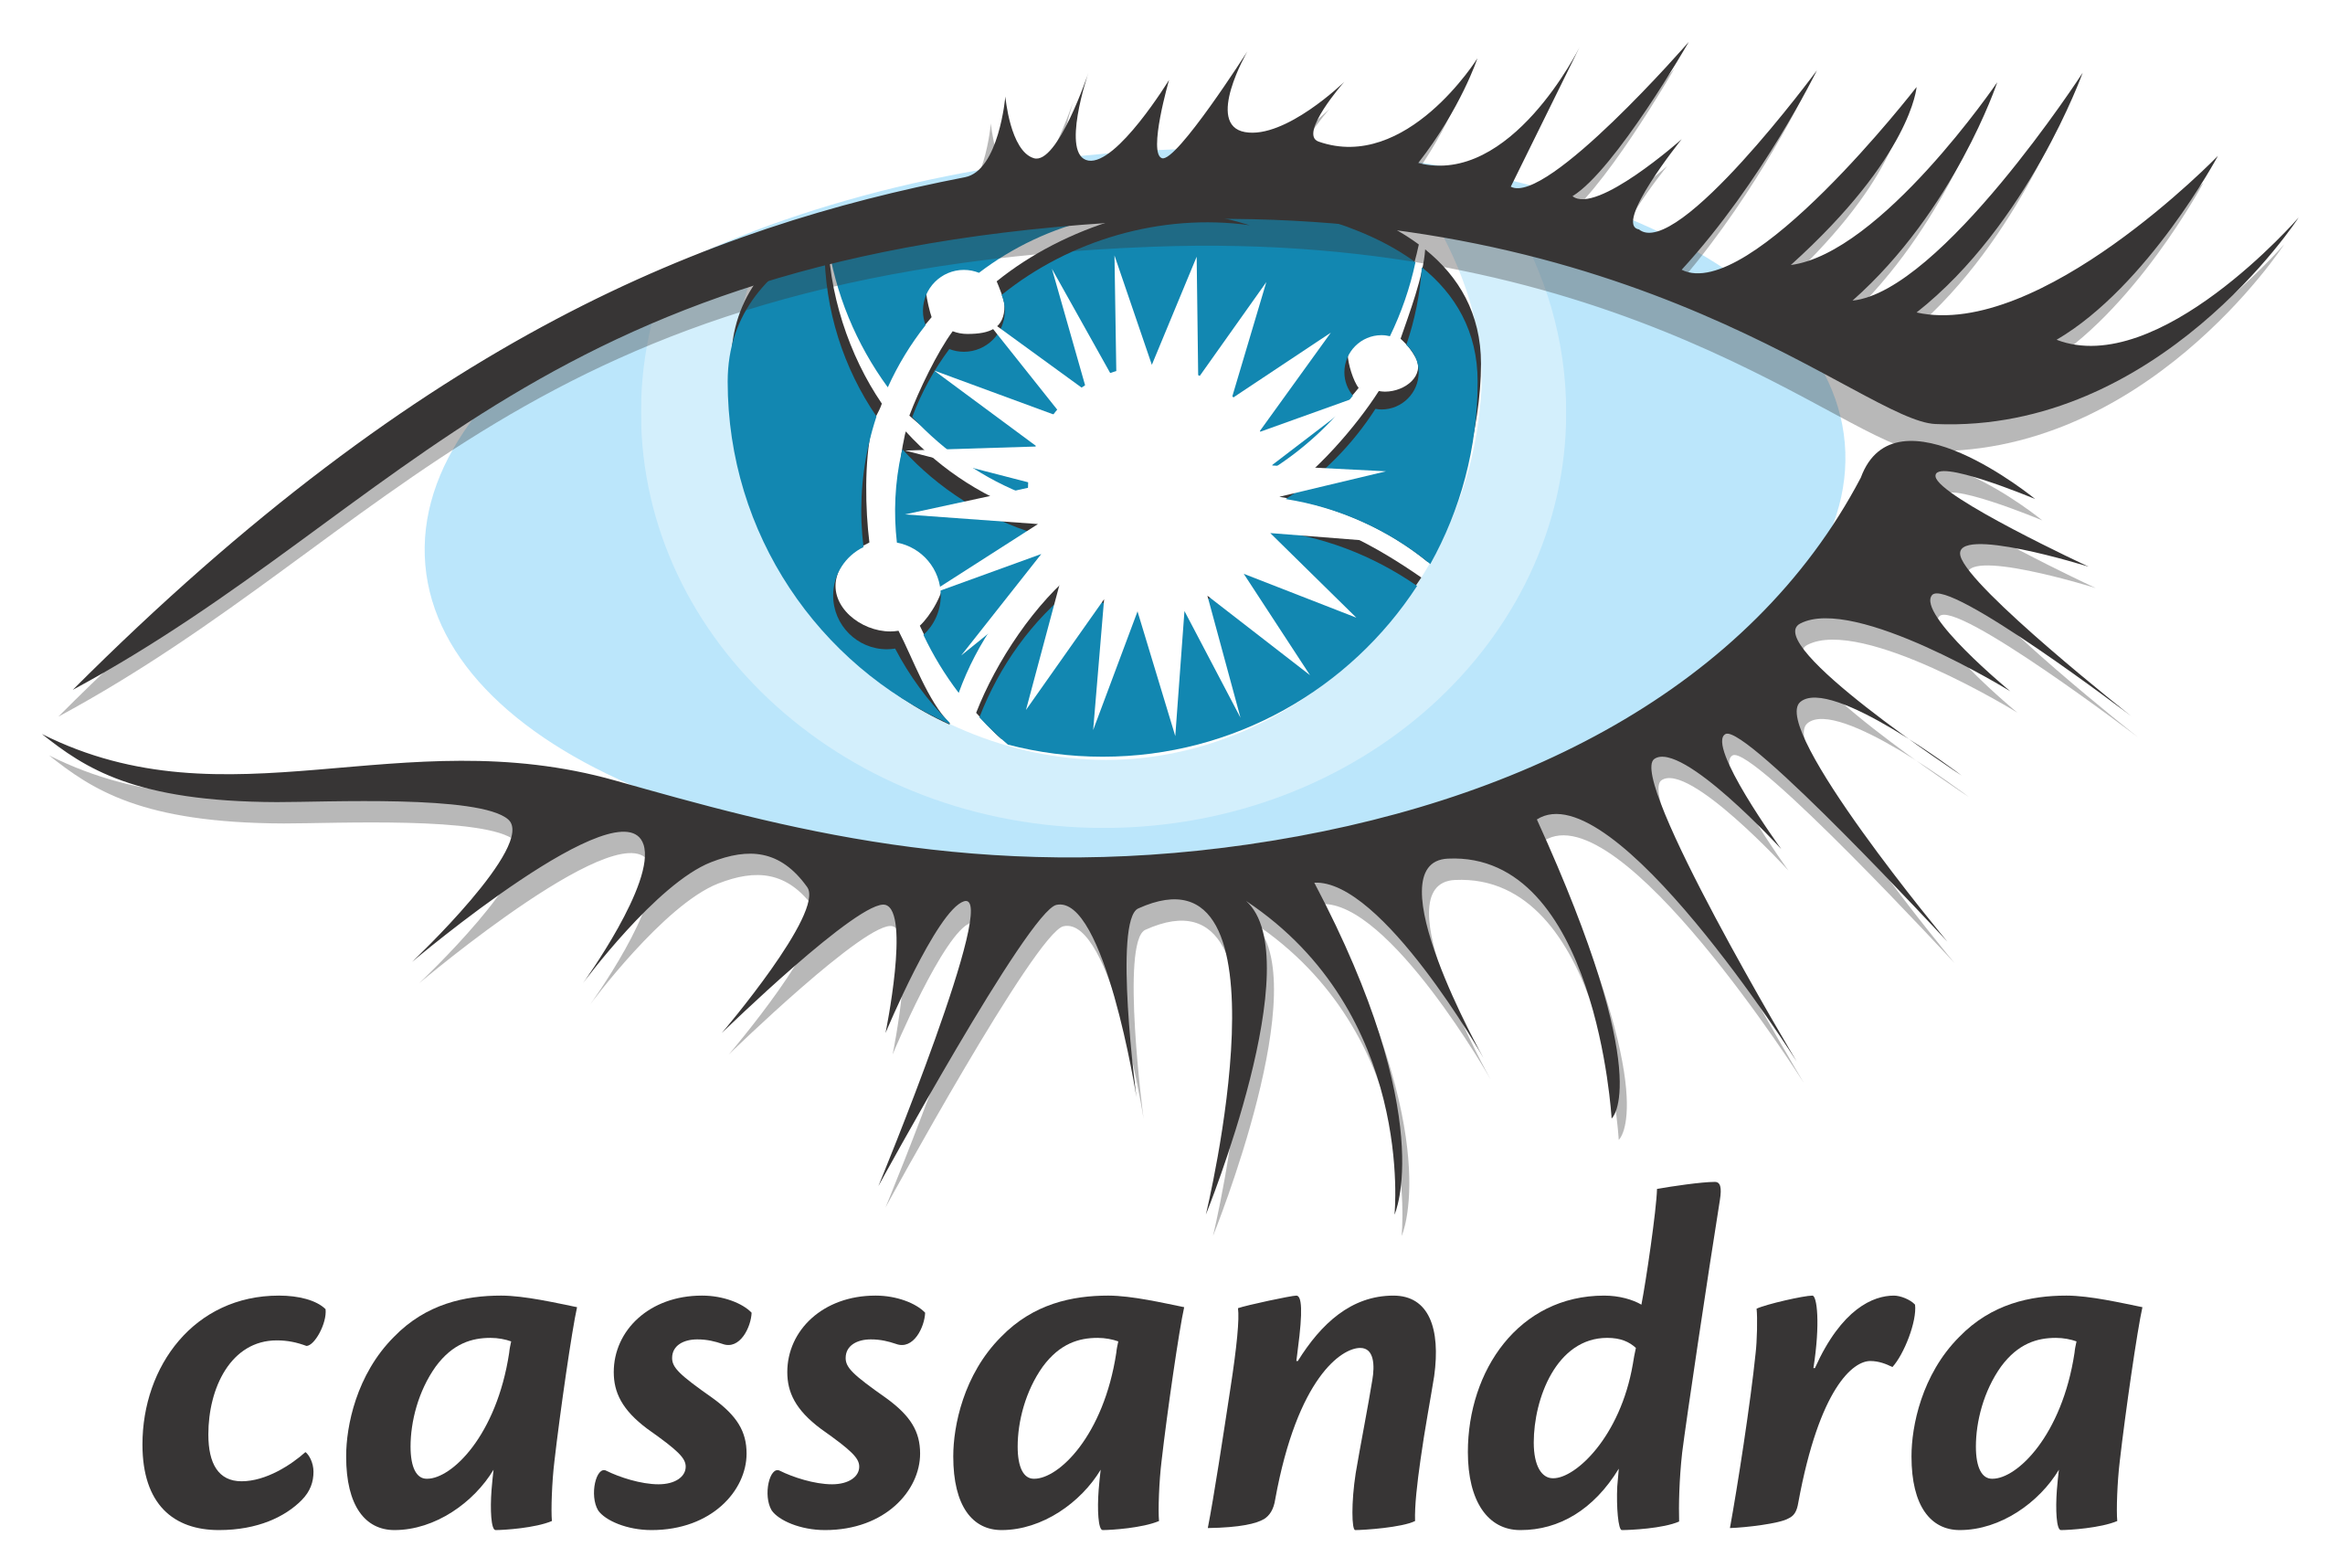 How to Install Cassandra on Linux Mint LTS - Featured